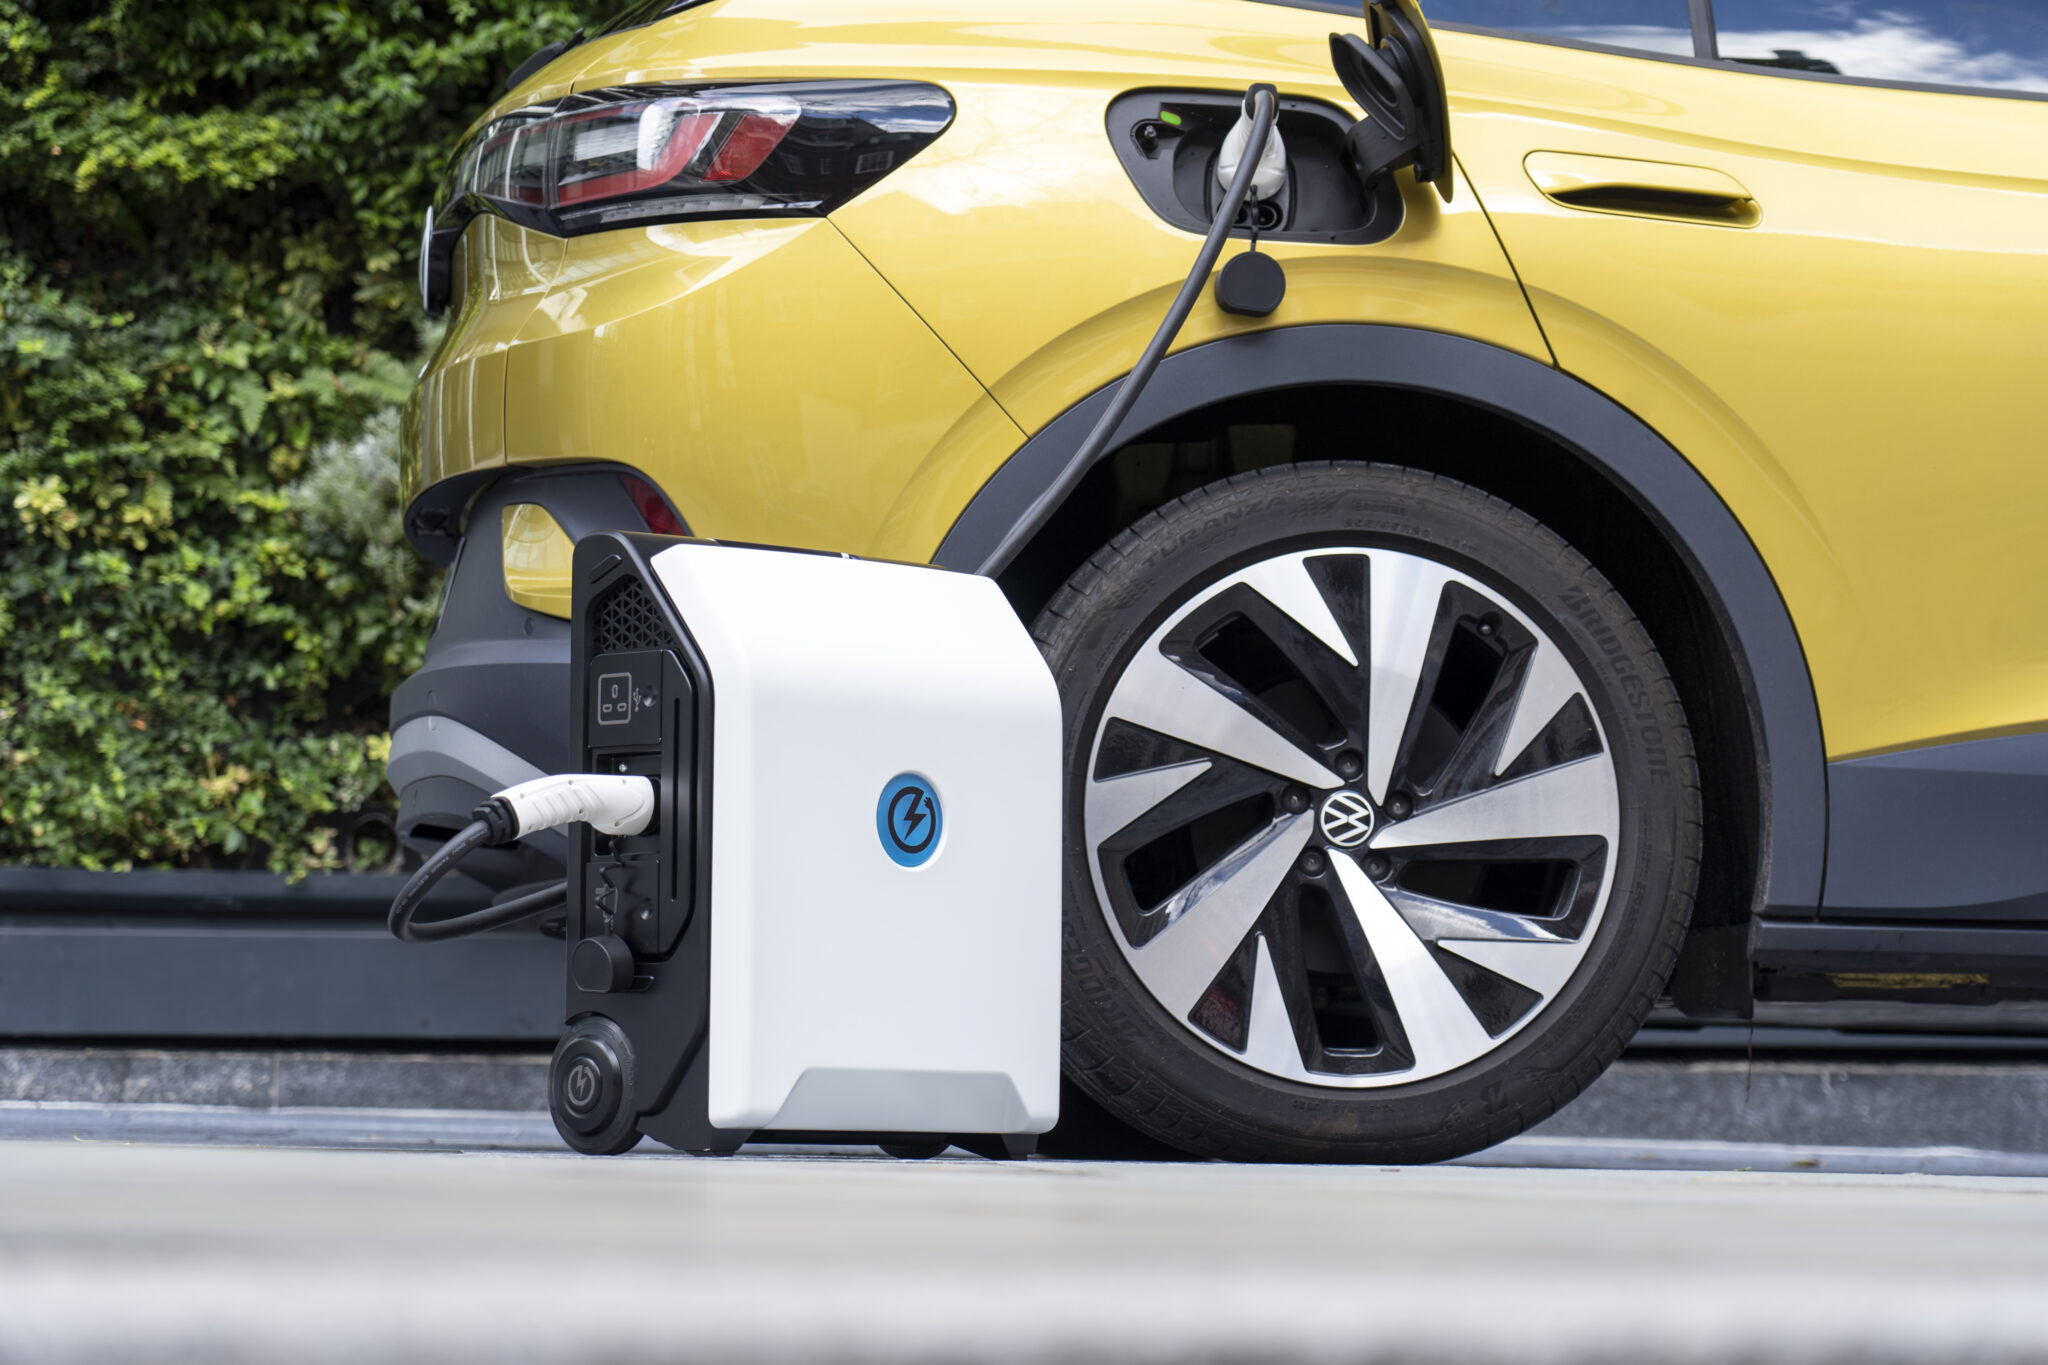 ZipCharge: Revolutionary Portable EV Charger, Allowing You to Charge Your Electric Car Anywhere, Revealed at COP26